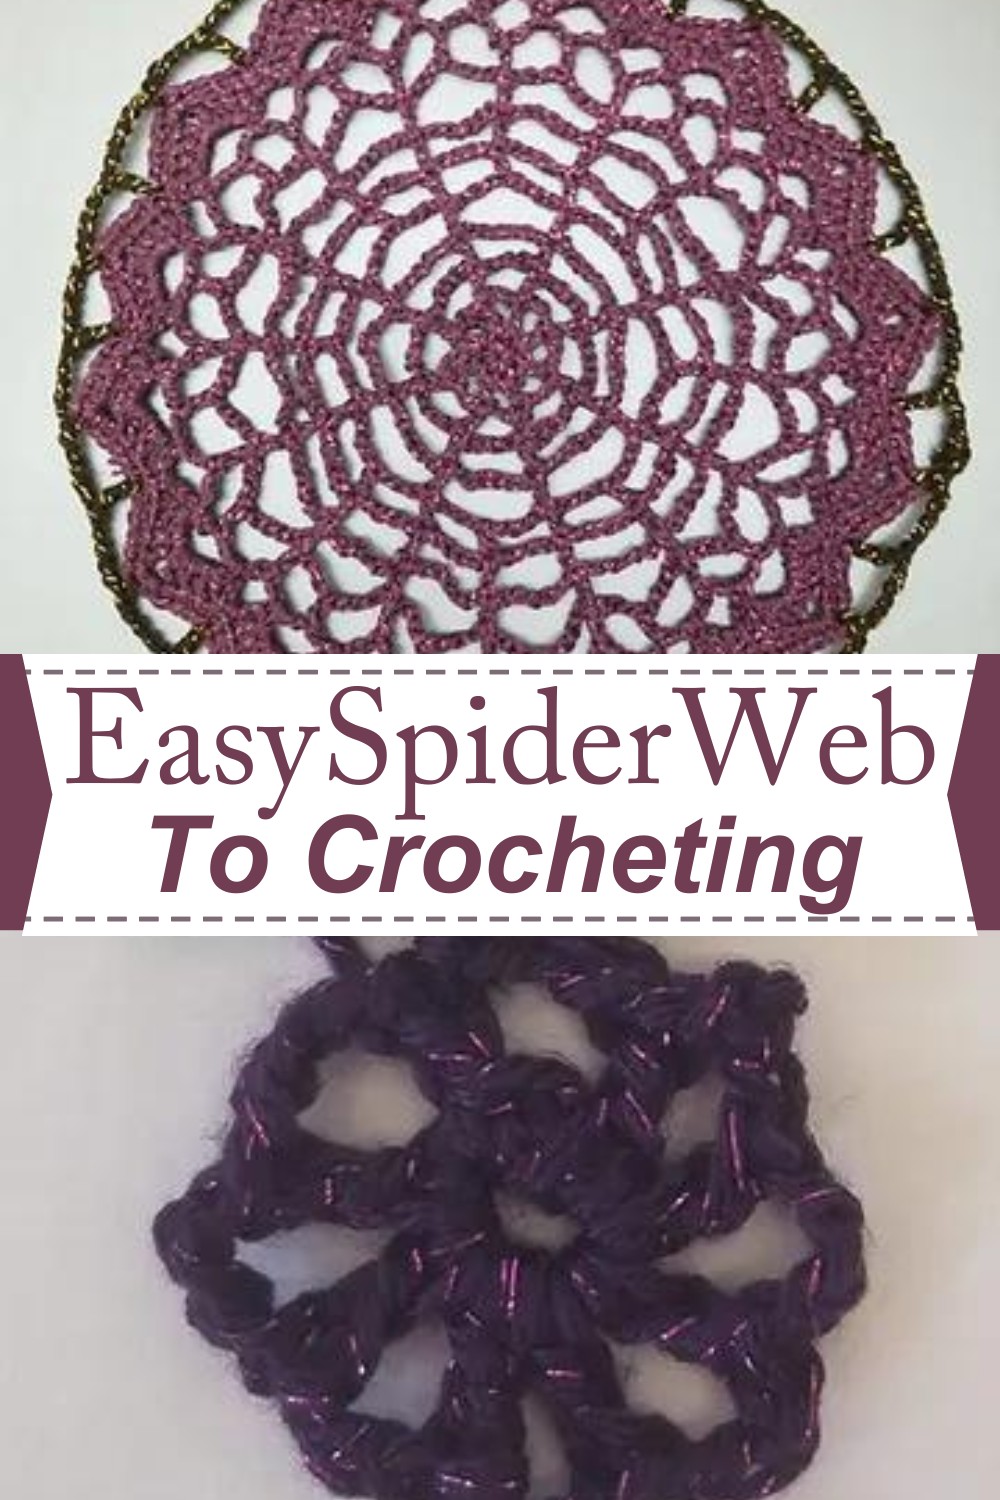 Easy Spider Web To Crocheting